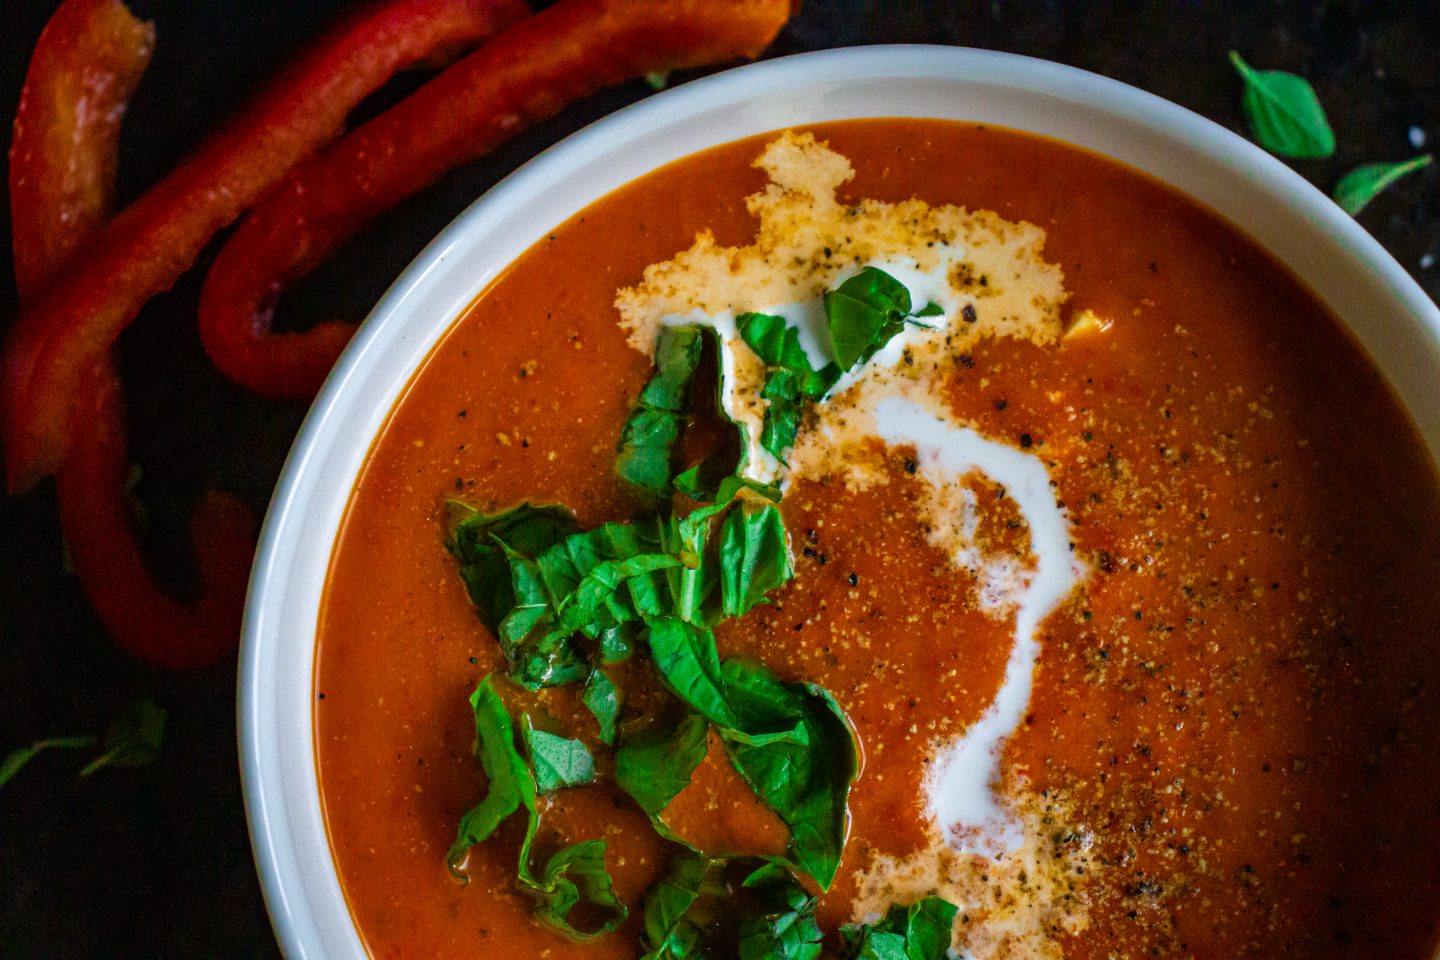 roasted red pepper and smoked gouda soup on www.thedanareneeway.com